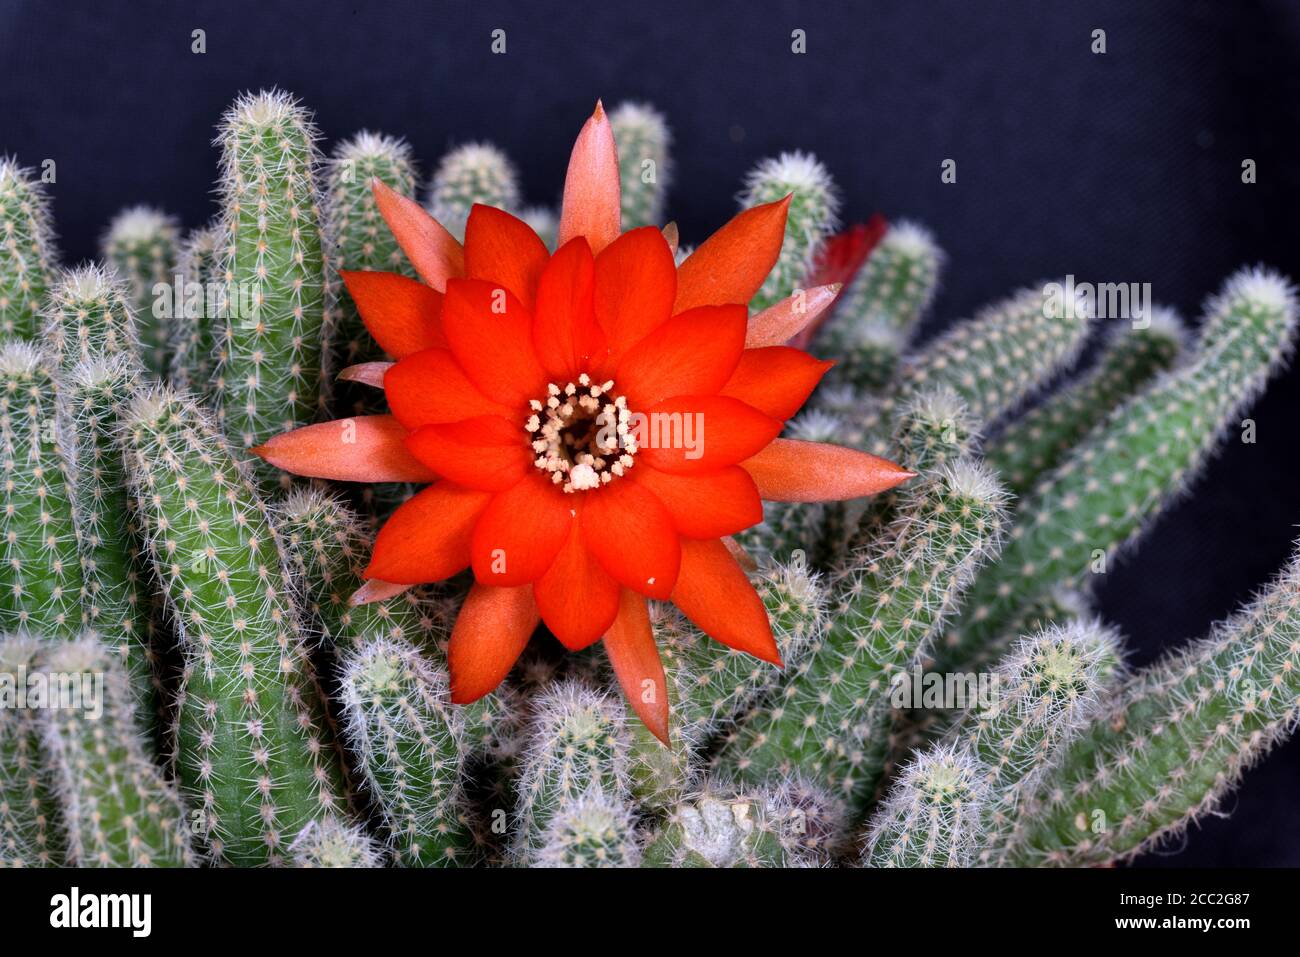 The fully opened flower of the Ladyfinger Cactus (Mammillaria sp)  in Southern England Stock Photo